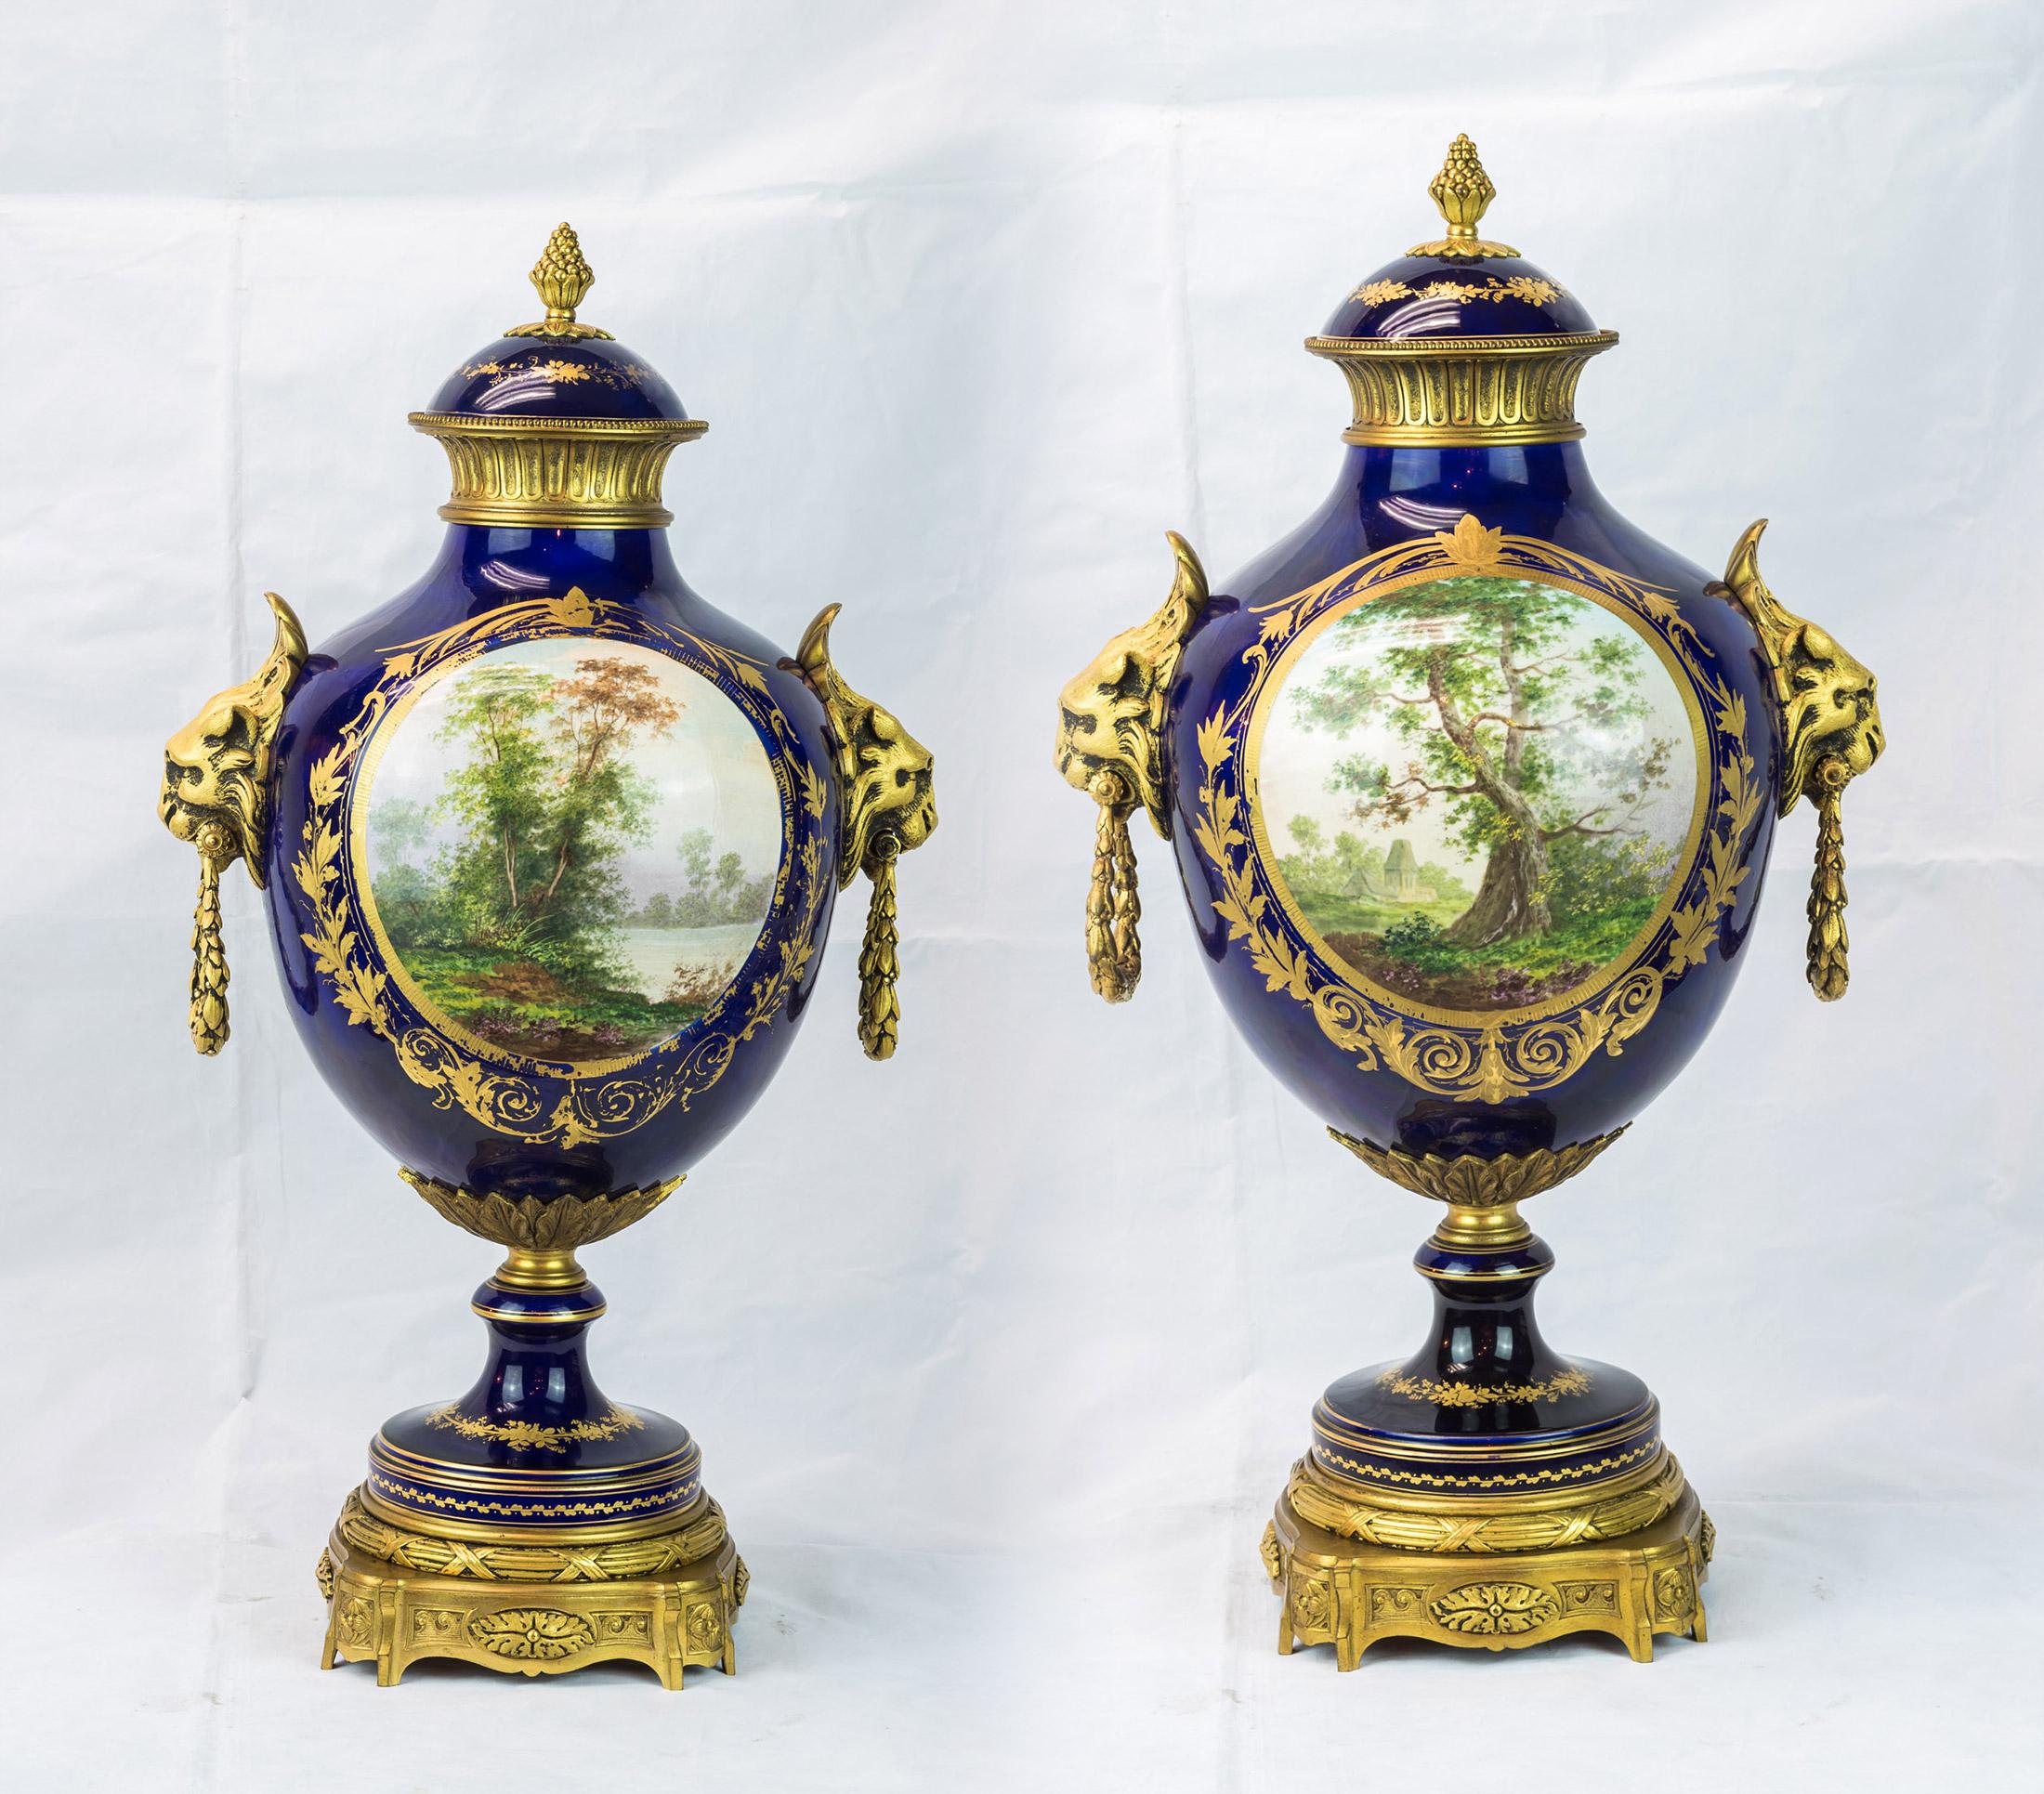 An exquisite pair of Sèvres style ormolu-mounted, cobalt blue, porcelain vases with lion mask handles, hand painted mythological scenes to the front.

Date: circa 1880
Origin: French
Dimension: 24 in. x 13 in.